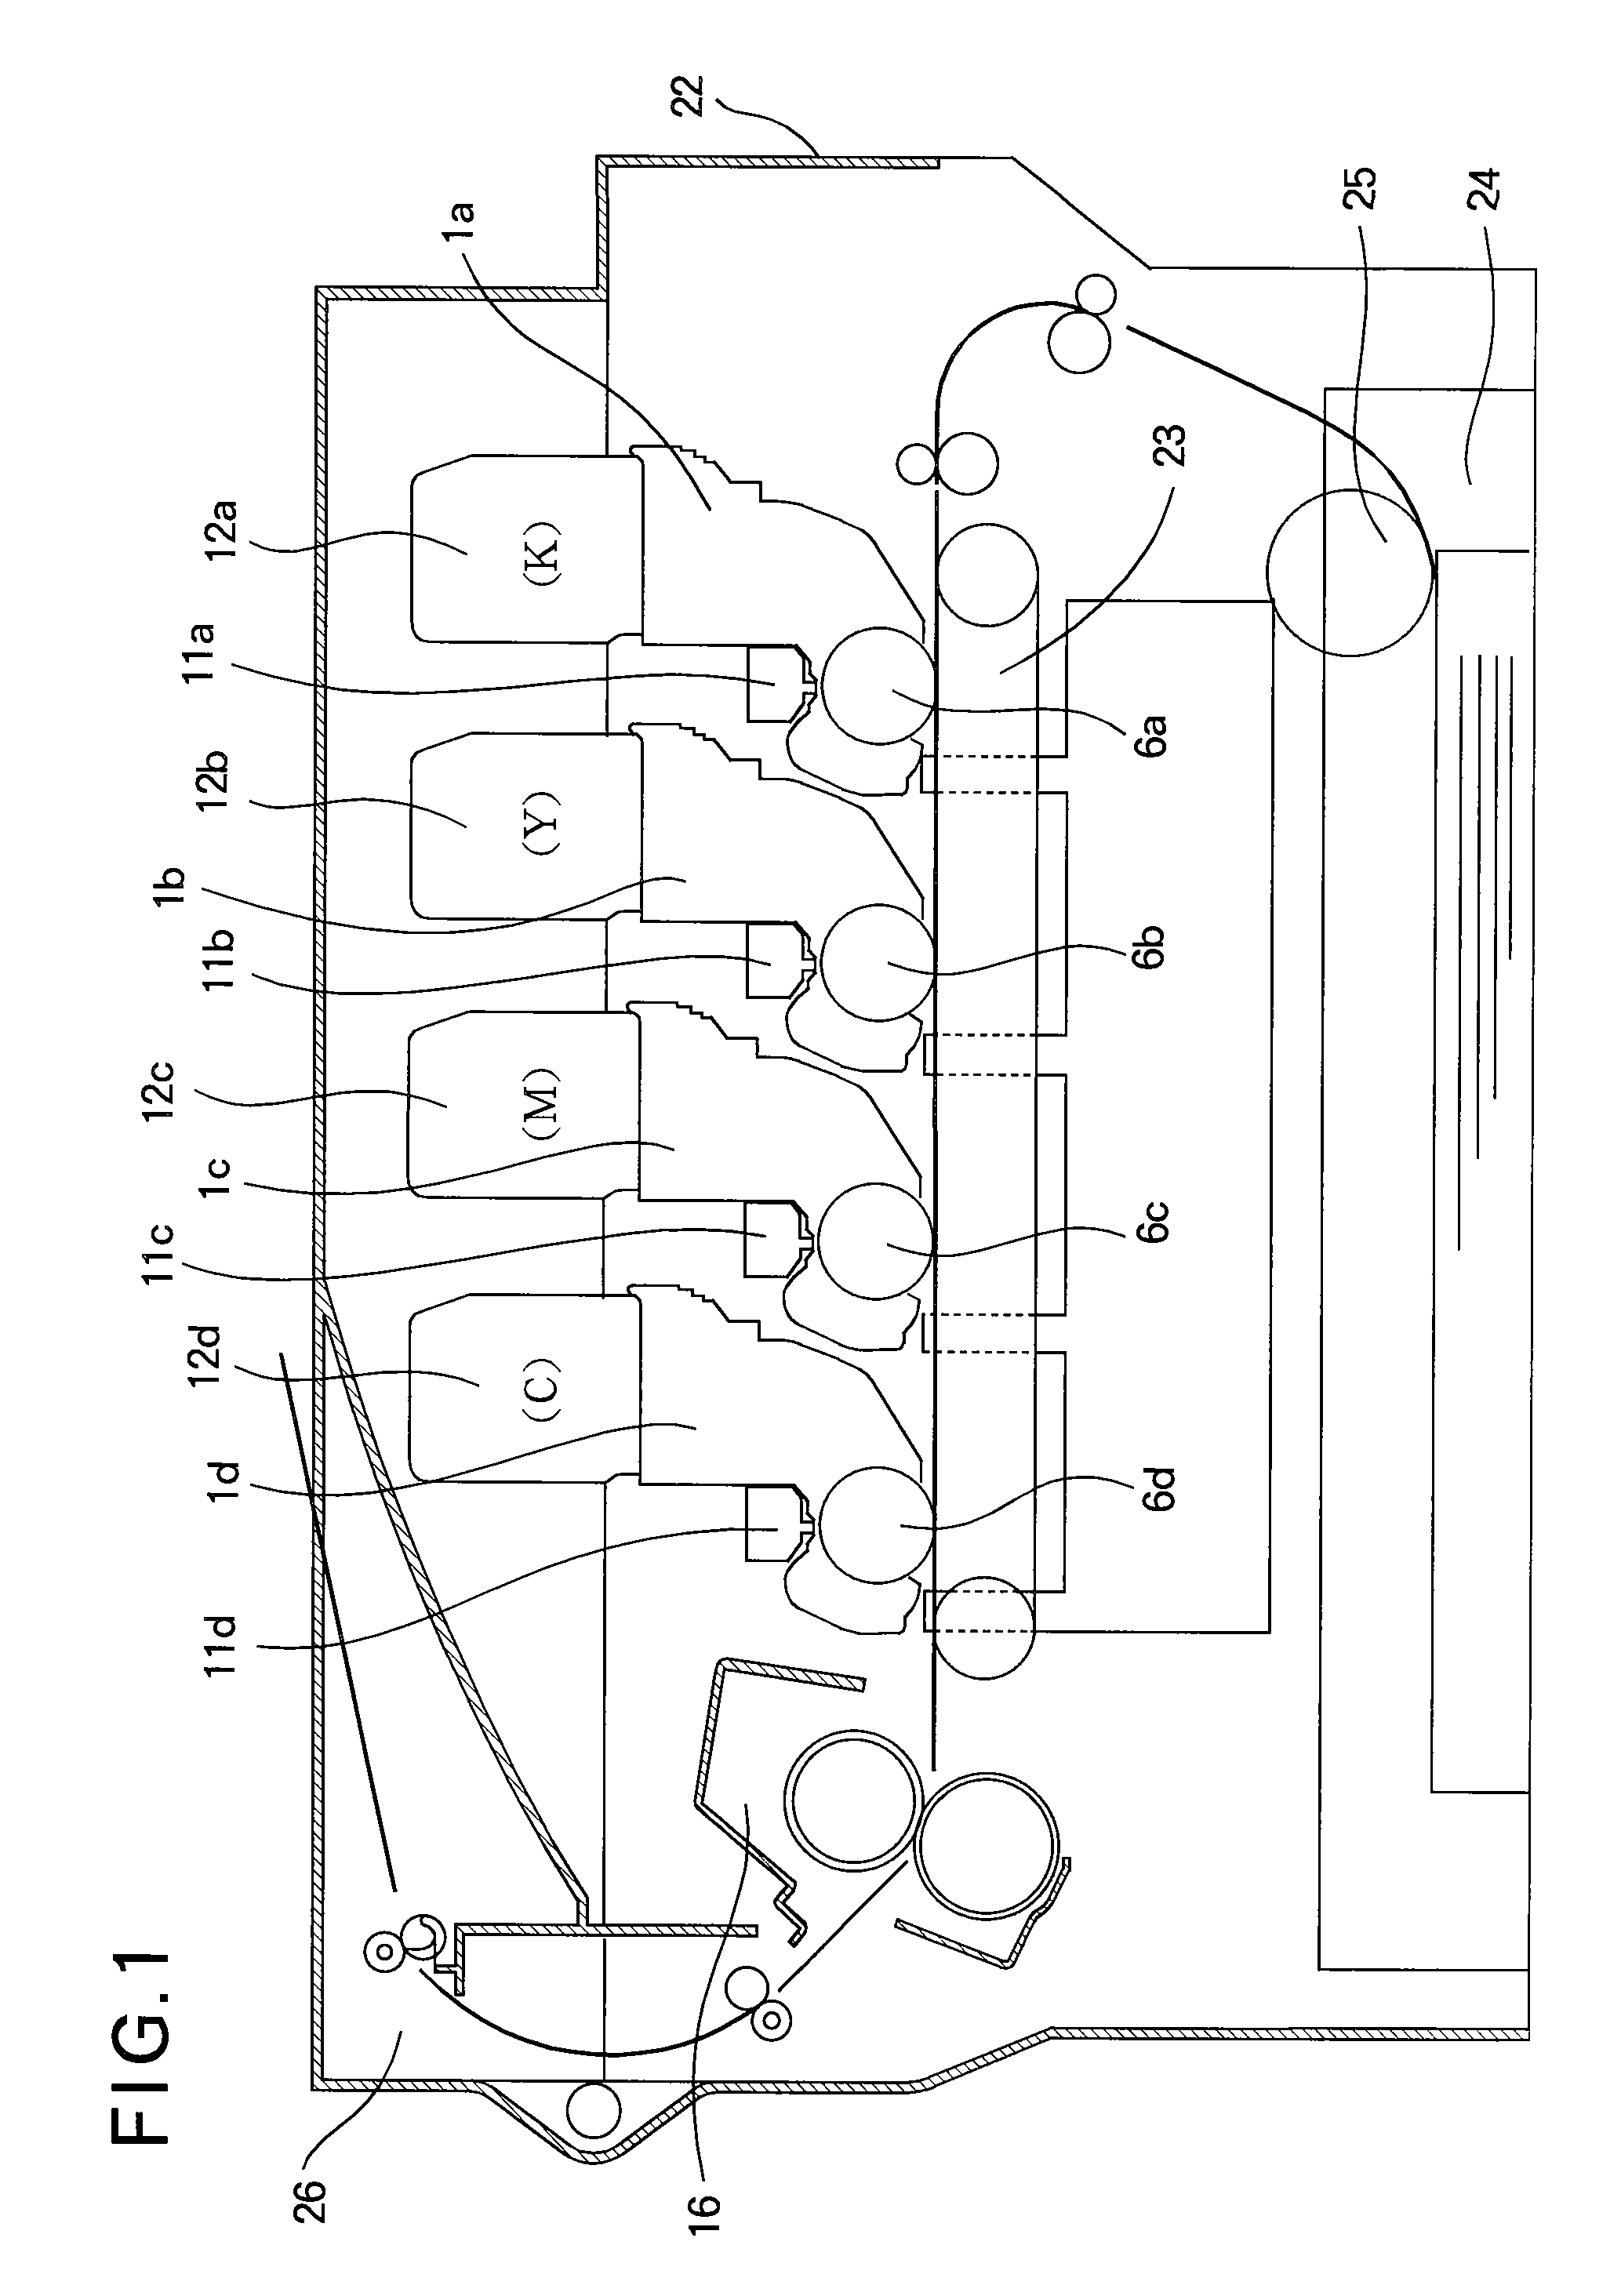 Developing Apparatus and Image Forming Apparatus that Incorporates the Developing Apparatus